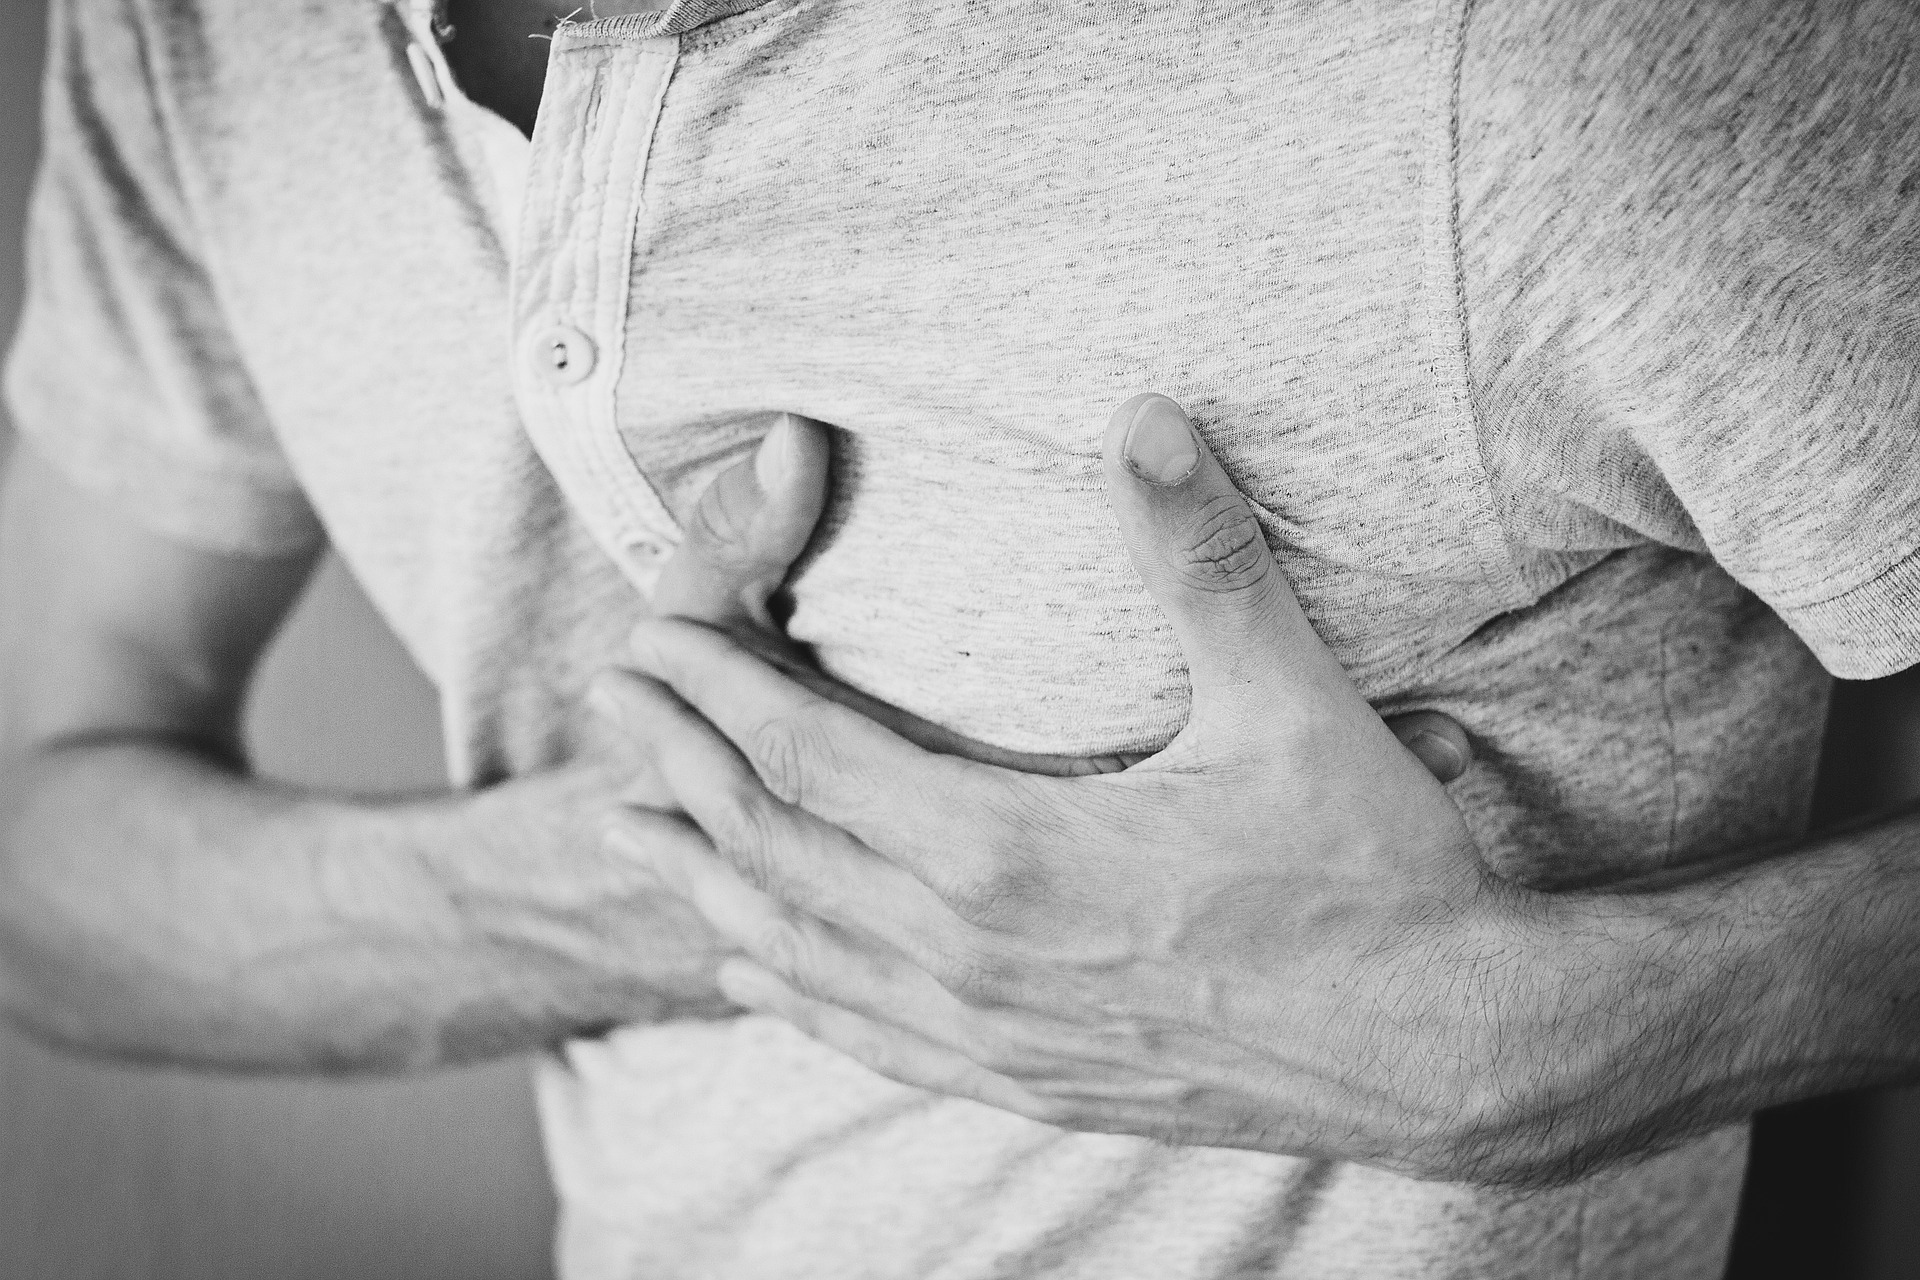 An adult male in a short-sleeved shirt with buttons touching his chest with both hands during a cardiac arrest